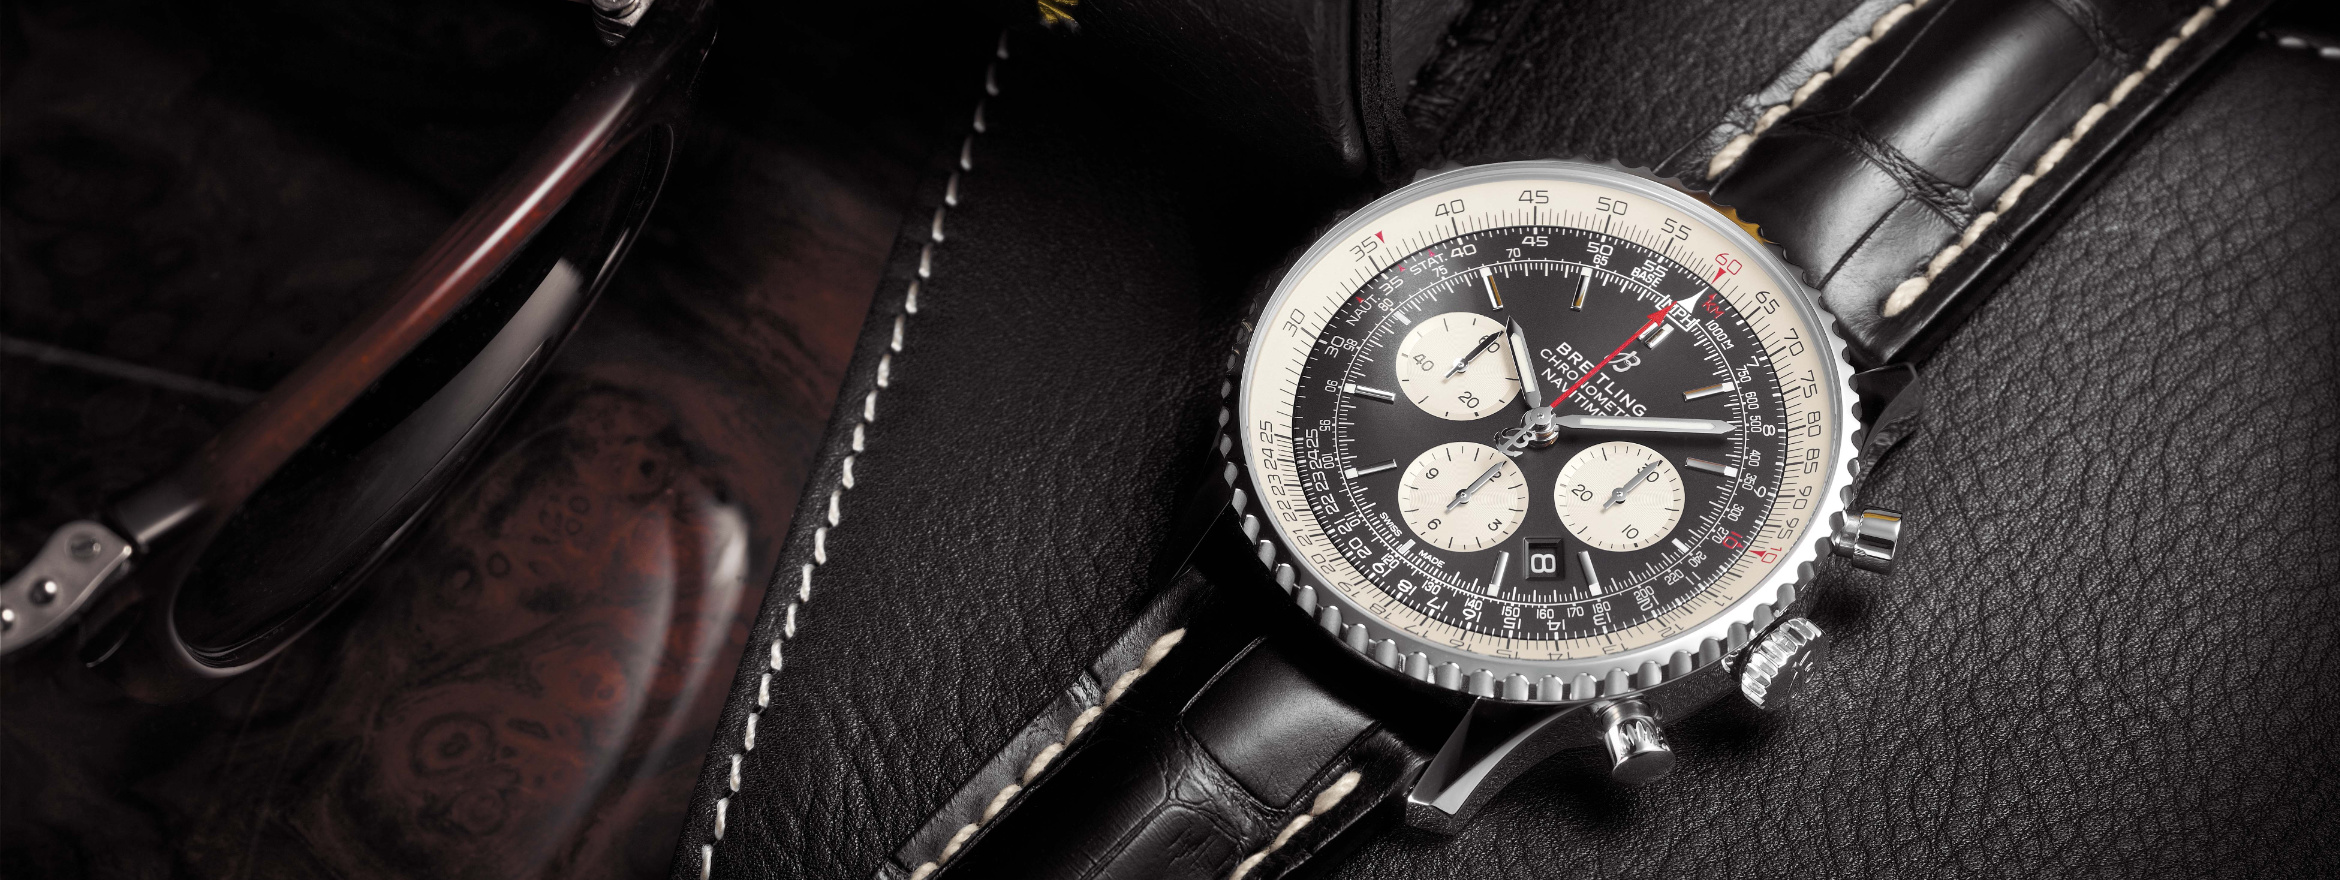 Behind the Navitimer – Key Individuals in Breitling’s History